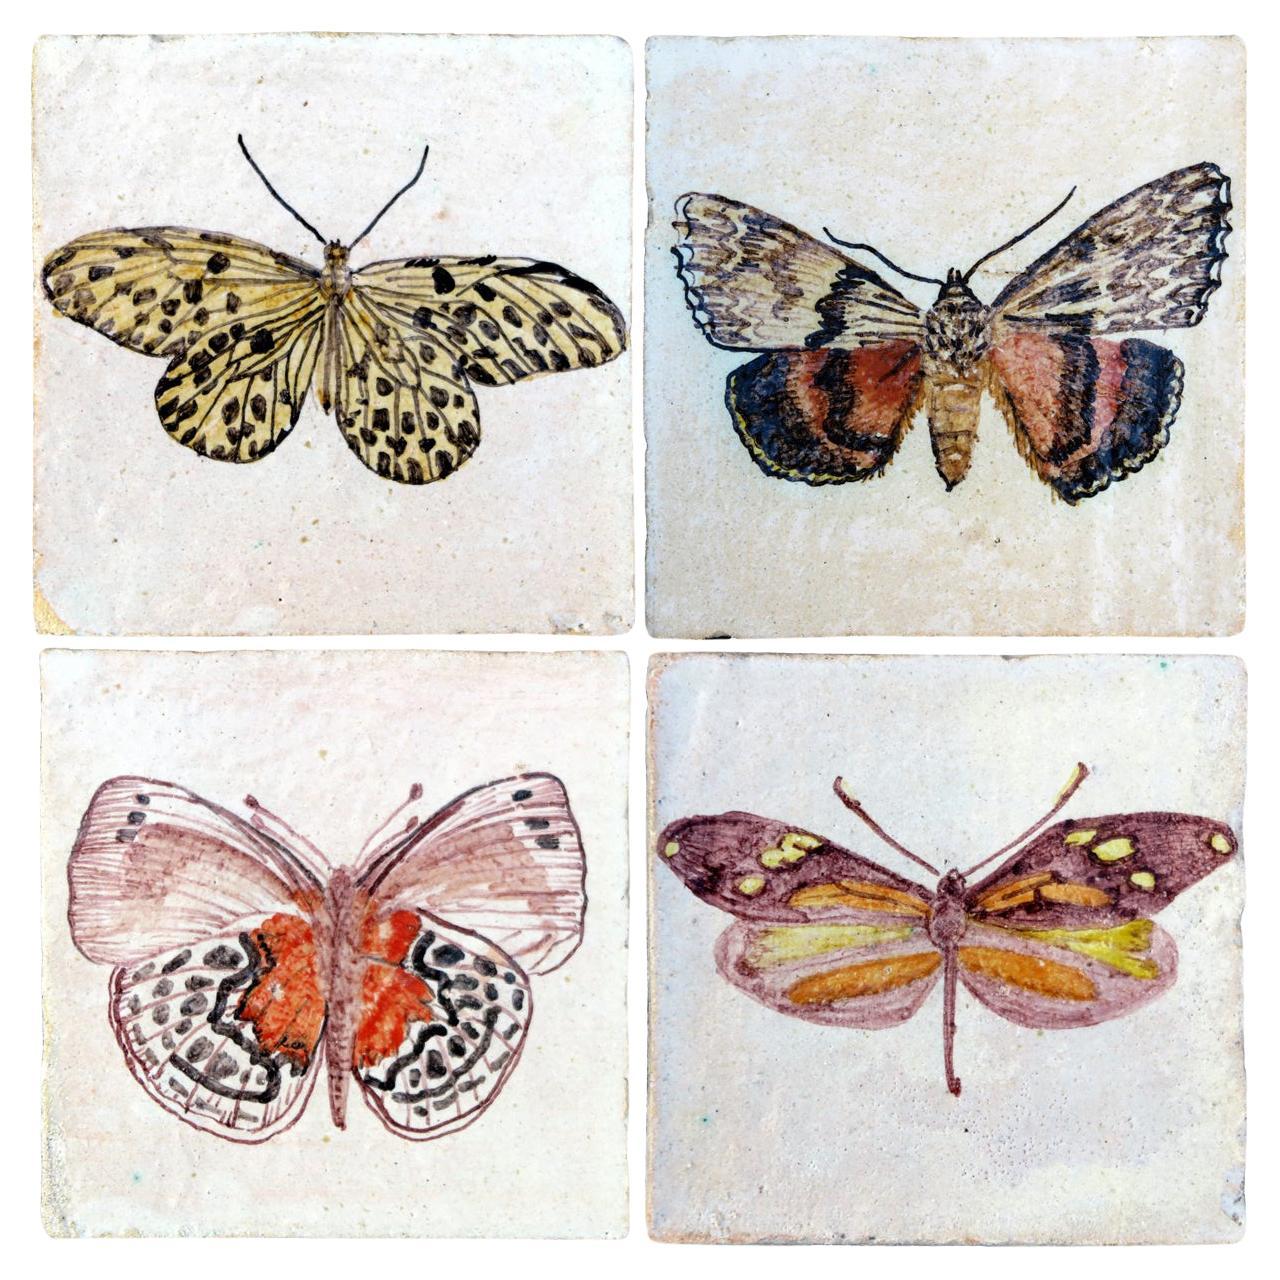 1 of the 4 Unique Handmade Majolica Butterfly Tiles Made in Italy